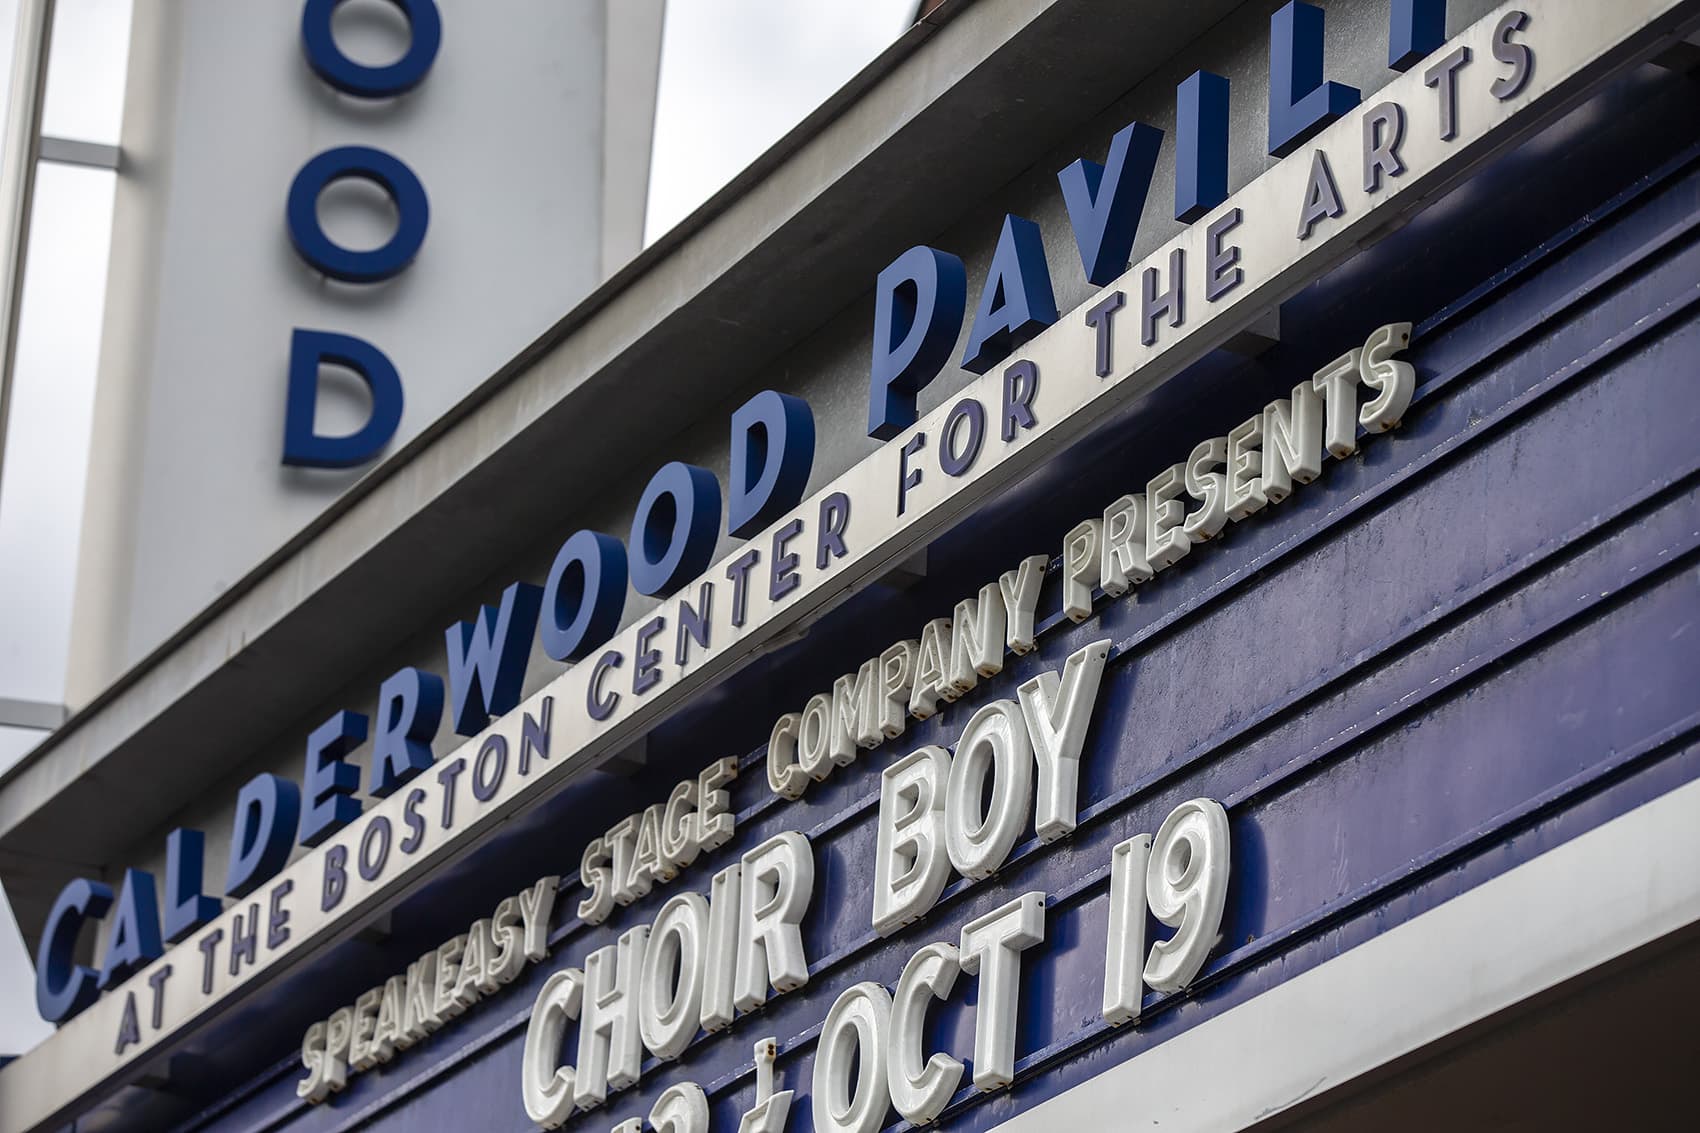 The marquee of the Calderwood Pavilion at the Boston Center for the Arts in the South End. (Jesse Costa/WBUR)